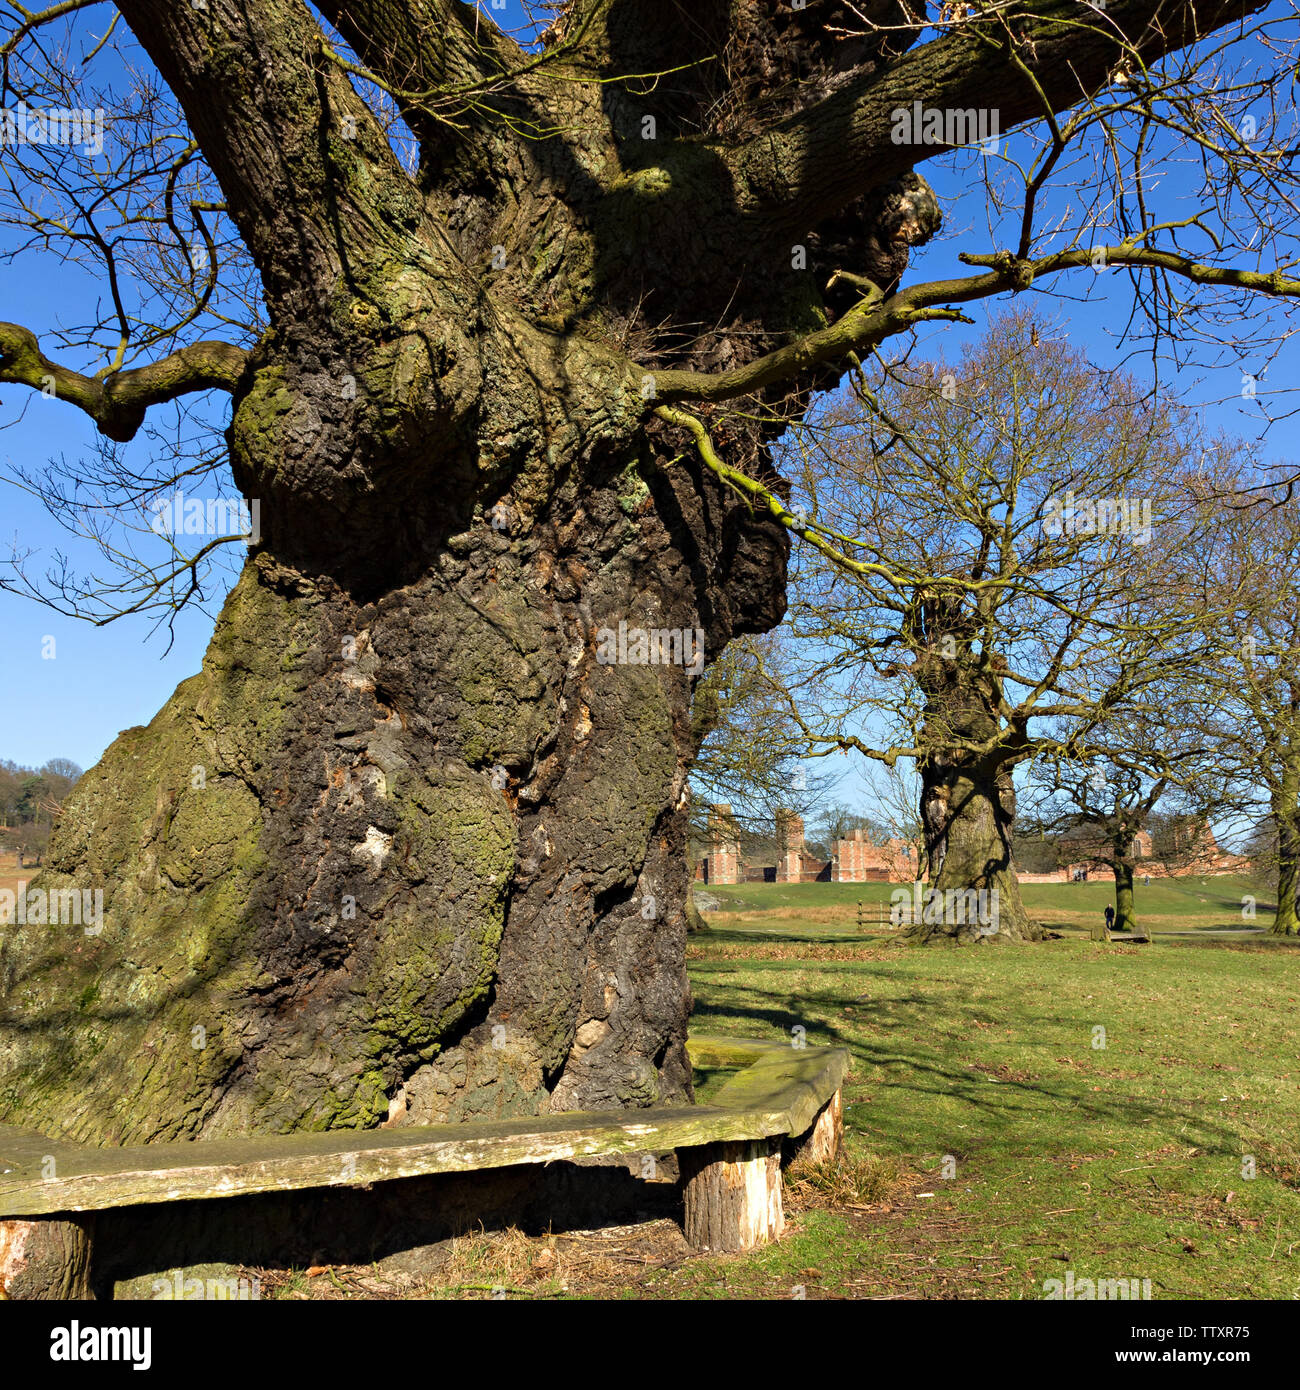 Ancient Oak tree with the ruins of Lady Jane Grey's House in the distance, Bradgate Park, Cropston, Leicestershire, England, UK Stock Photo